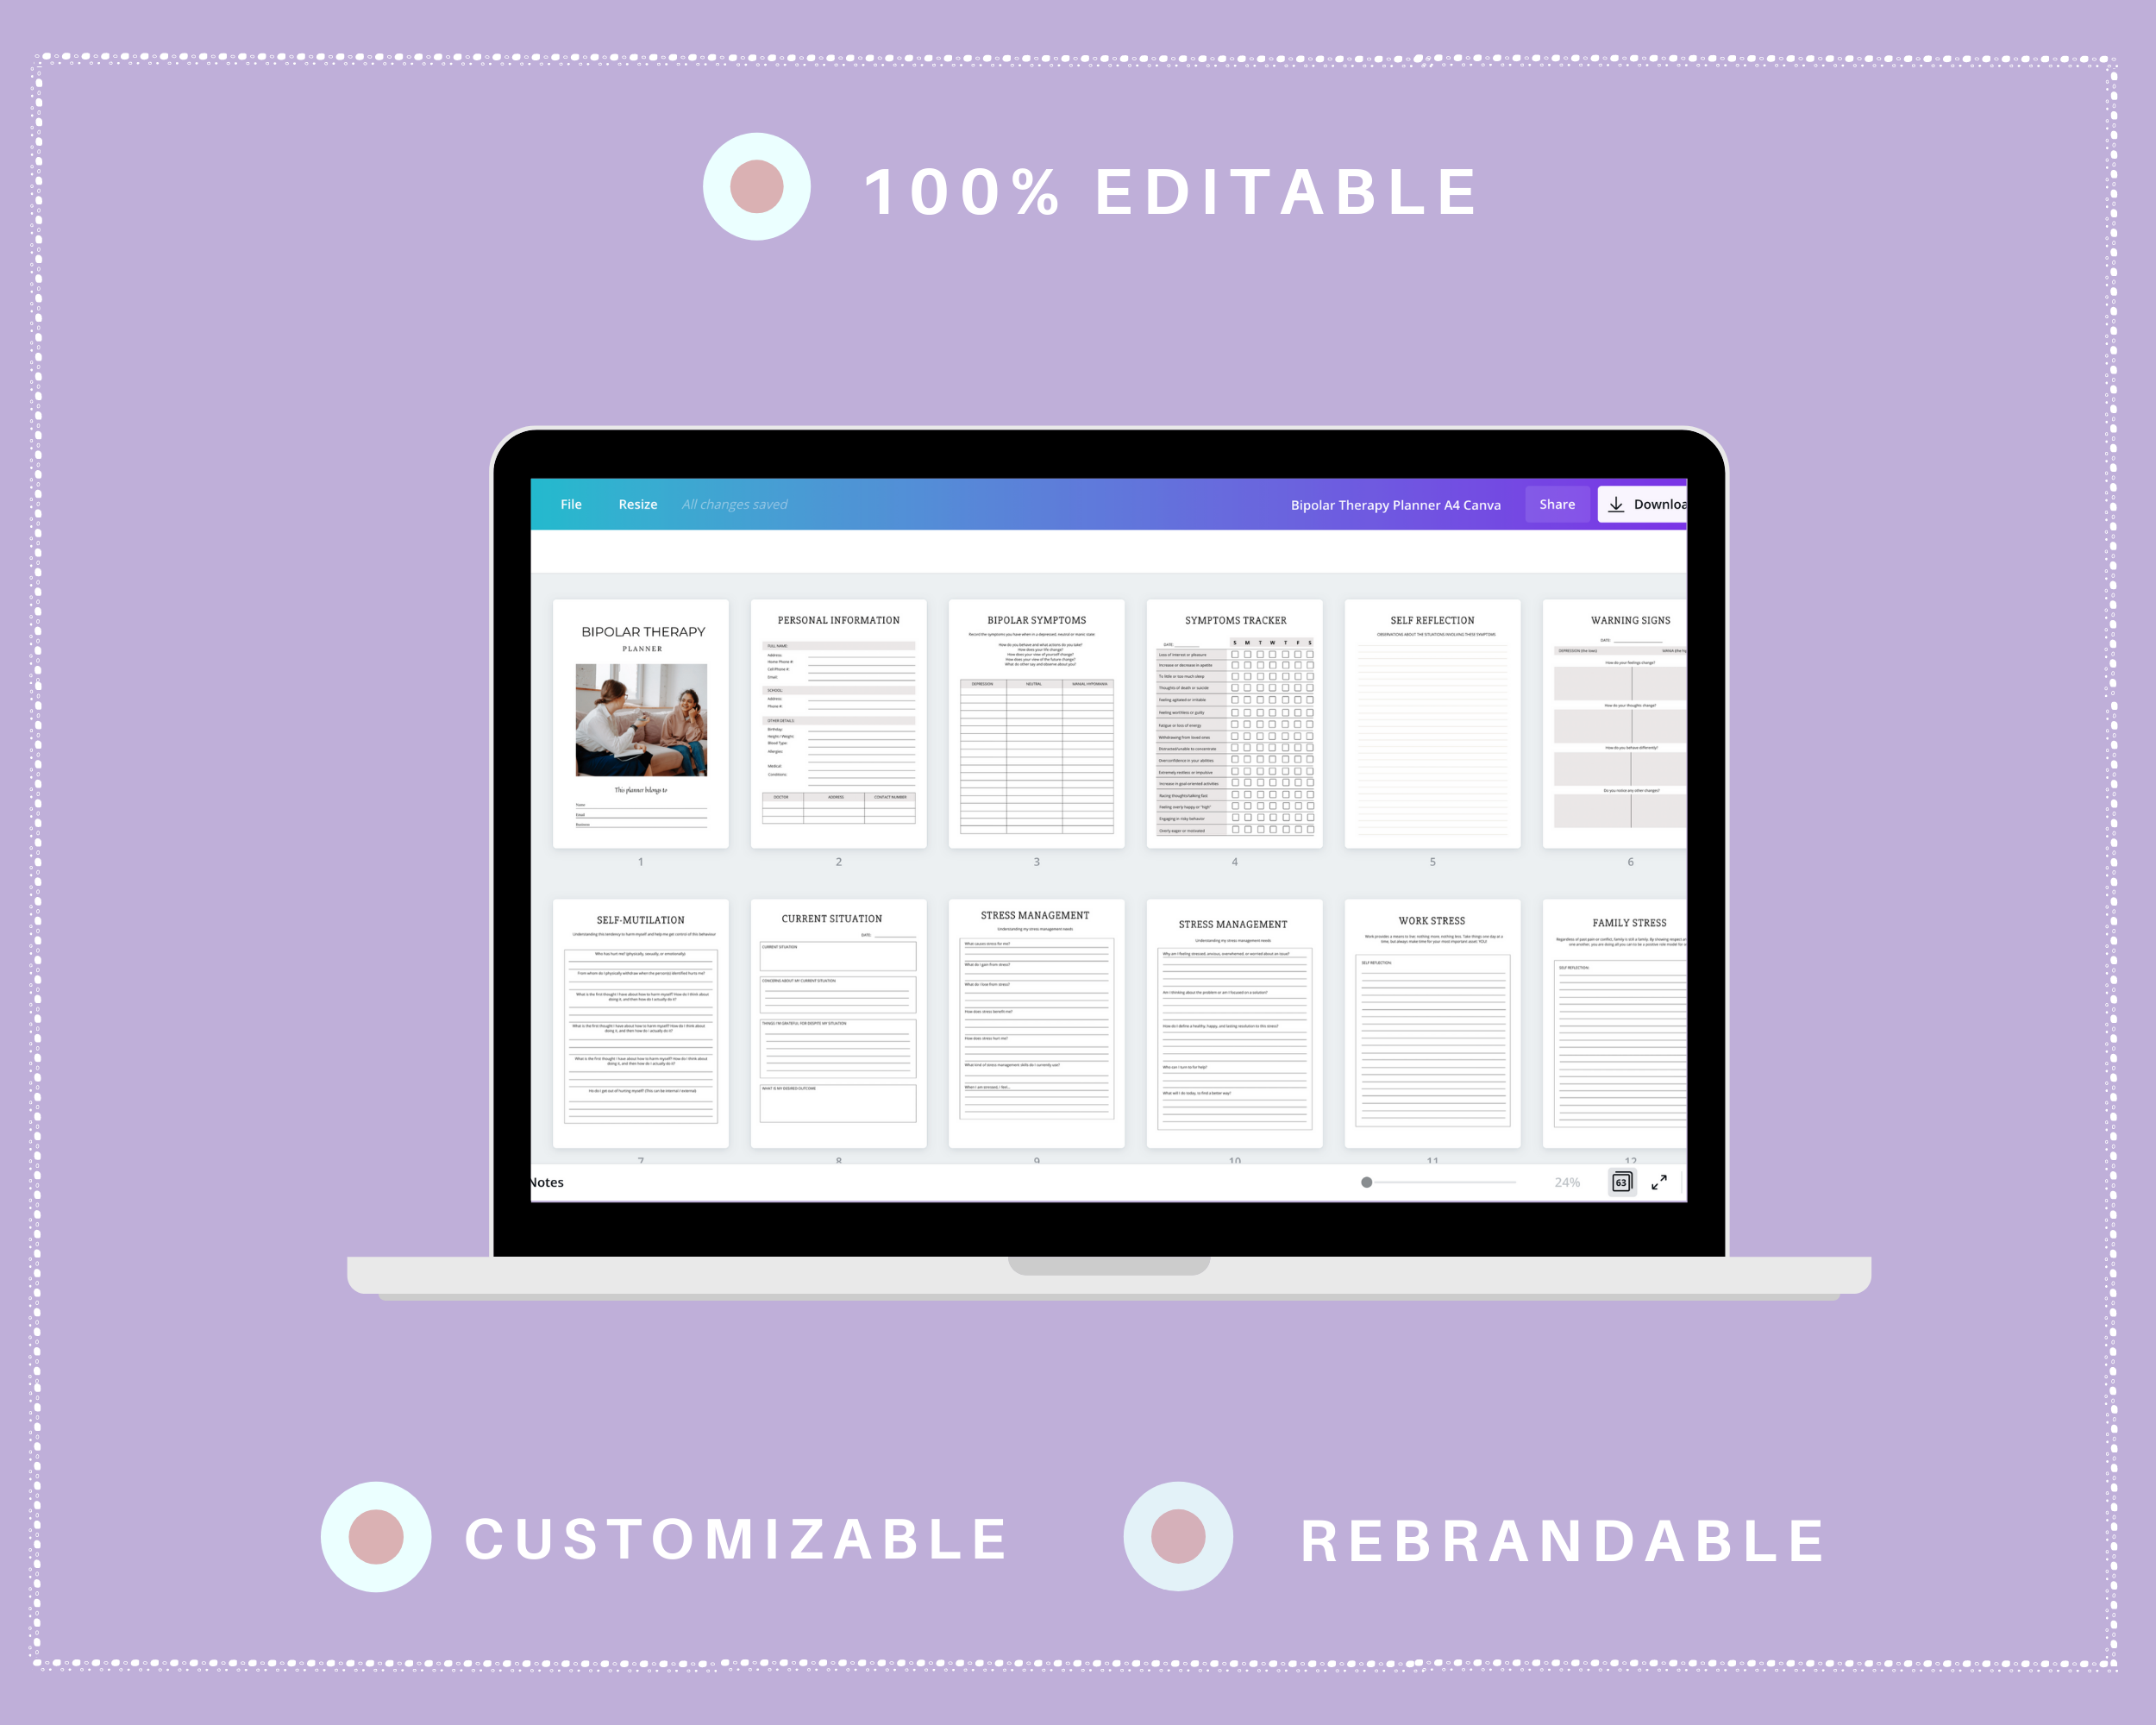 Editable Bipolar Therapy Planner in Canva | Commercial Use